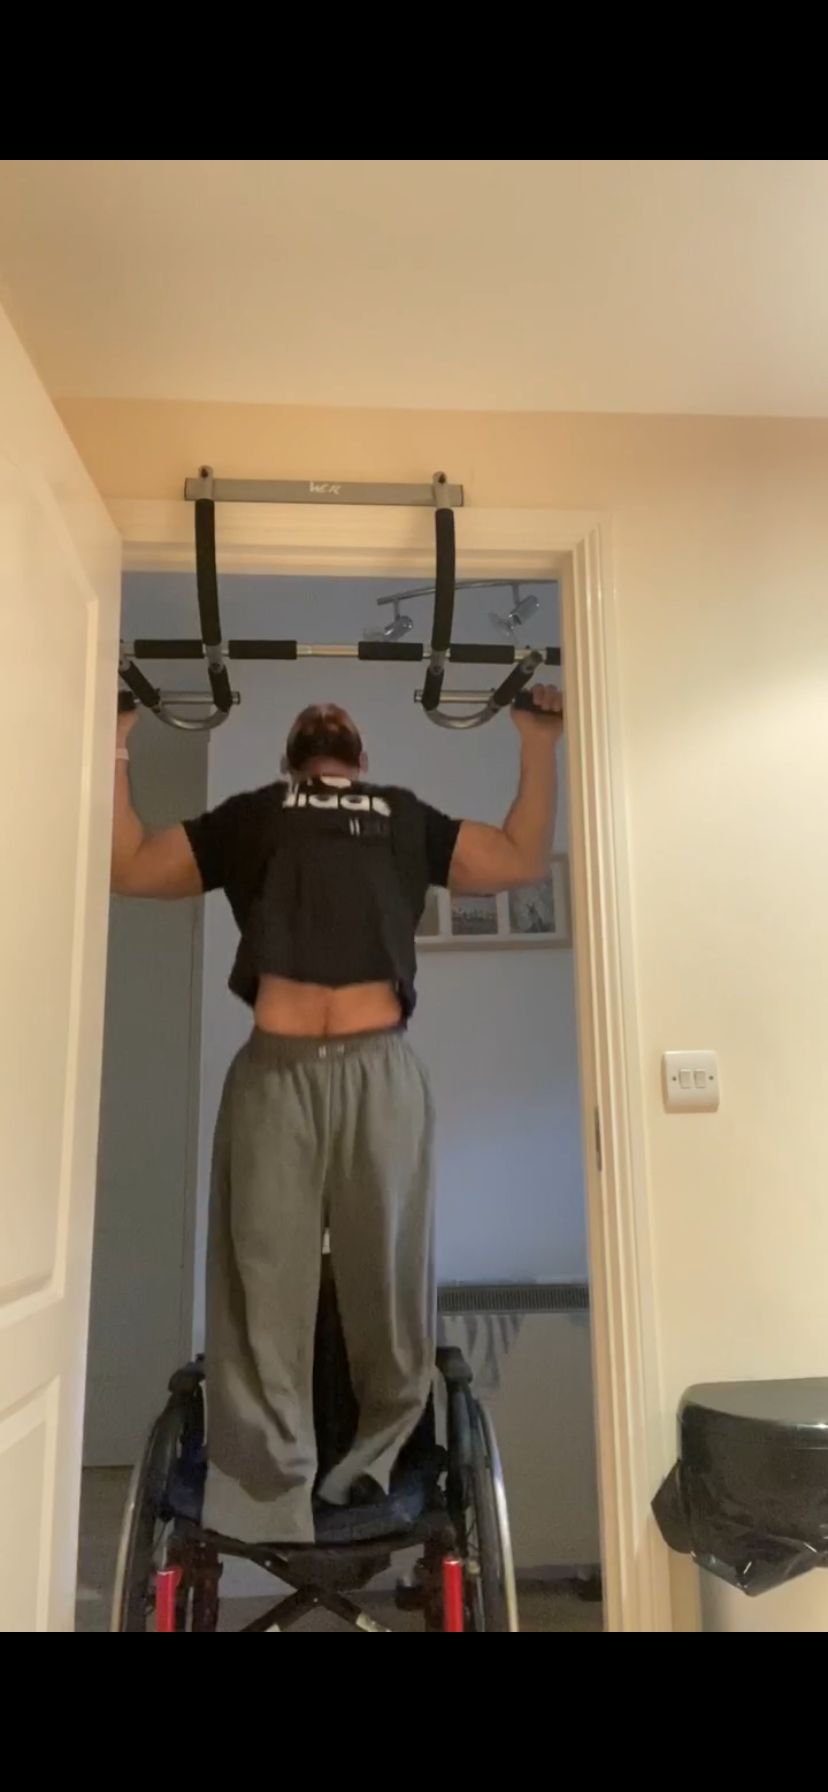 Ali Jawad converted his home into a gym throughout lockdown